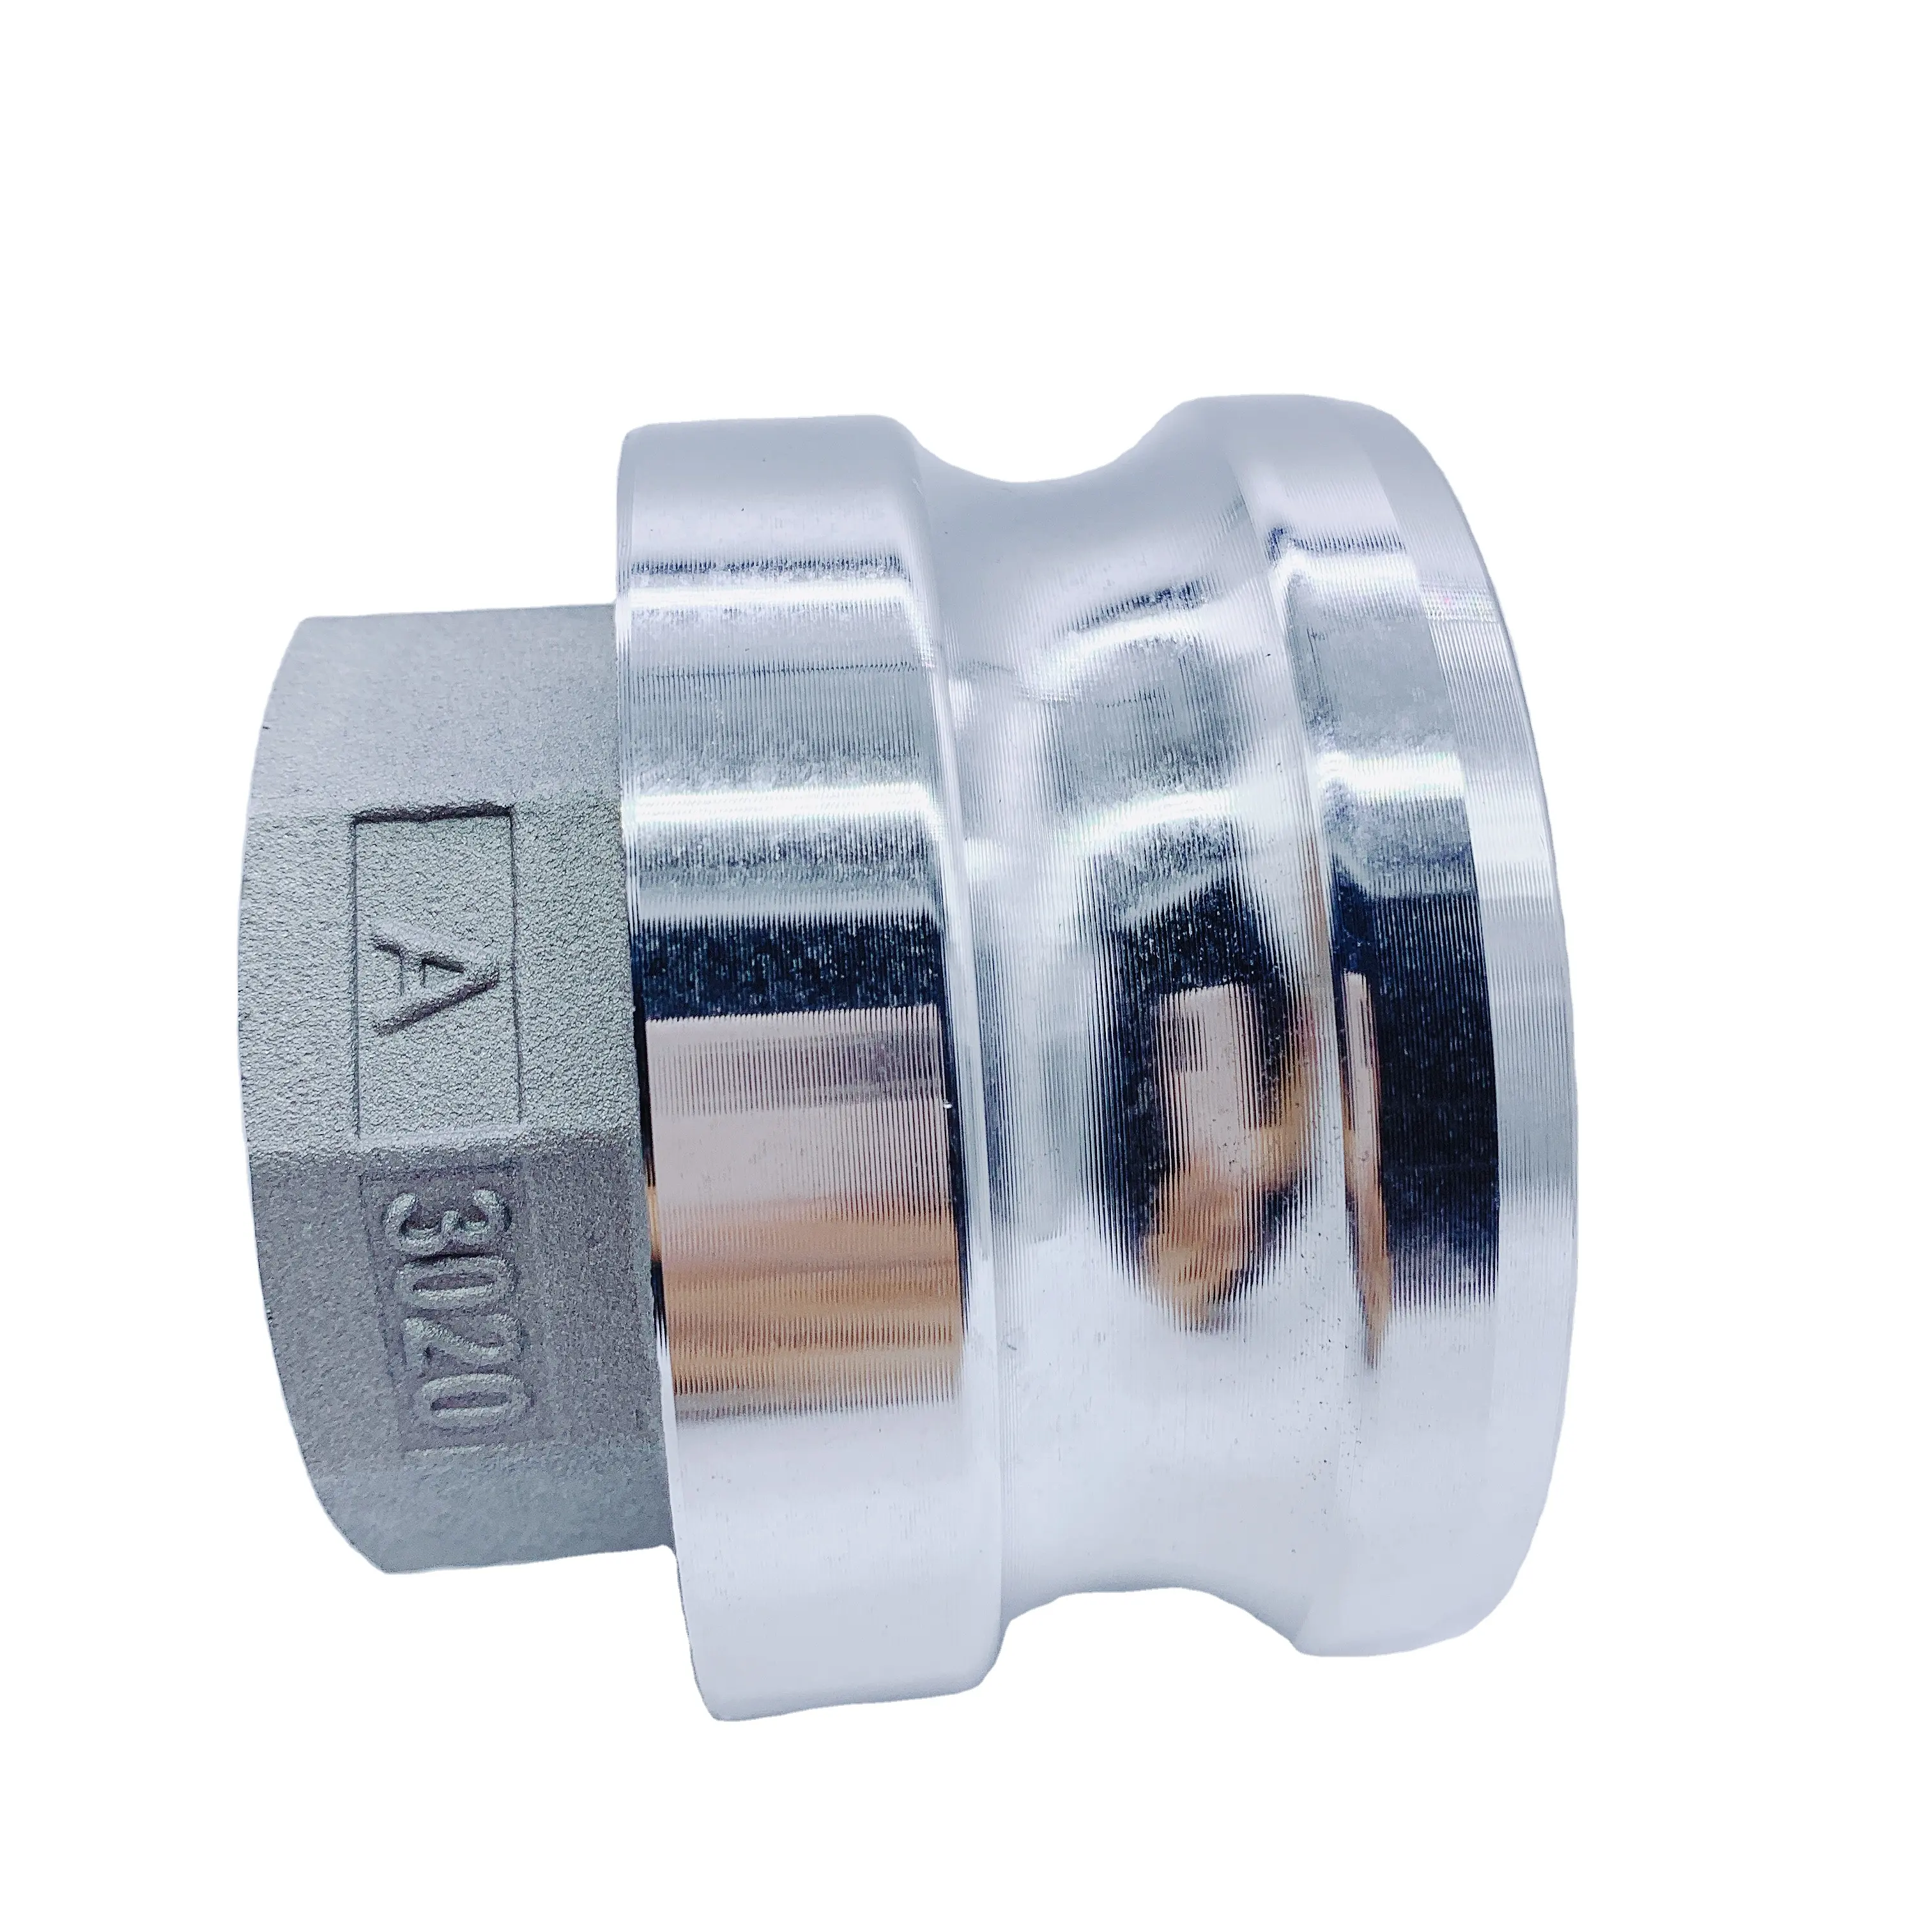 Hydraulic Pipe Fitting Type A 3"x2" Male Adapter X Female Aluminum quick coupling Camlock Reducer